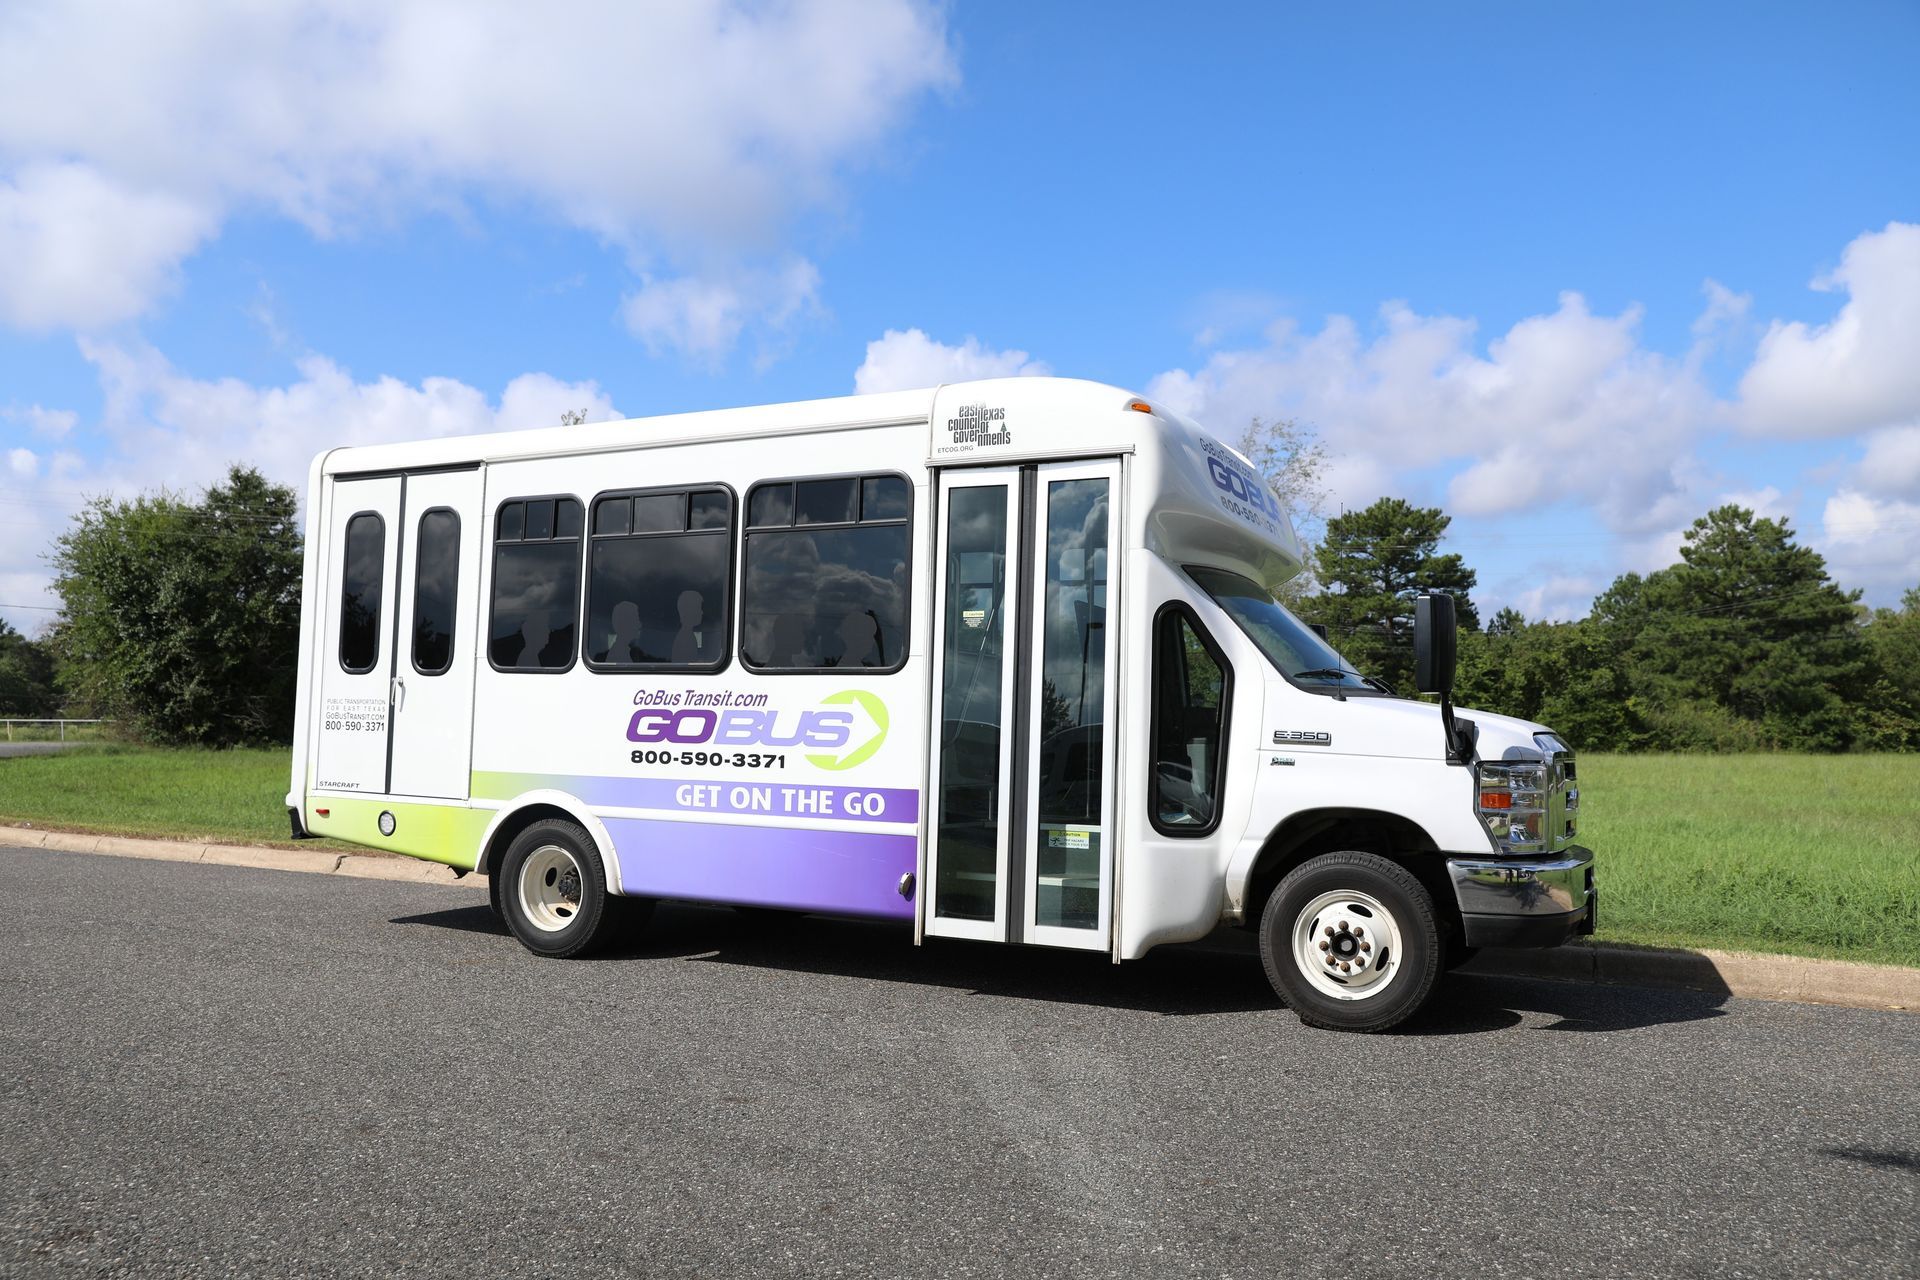 A white and purple bus is parked on the side of the road.